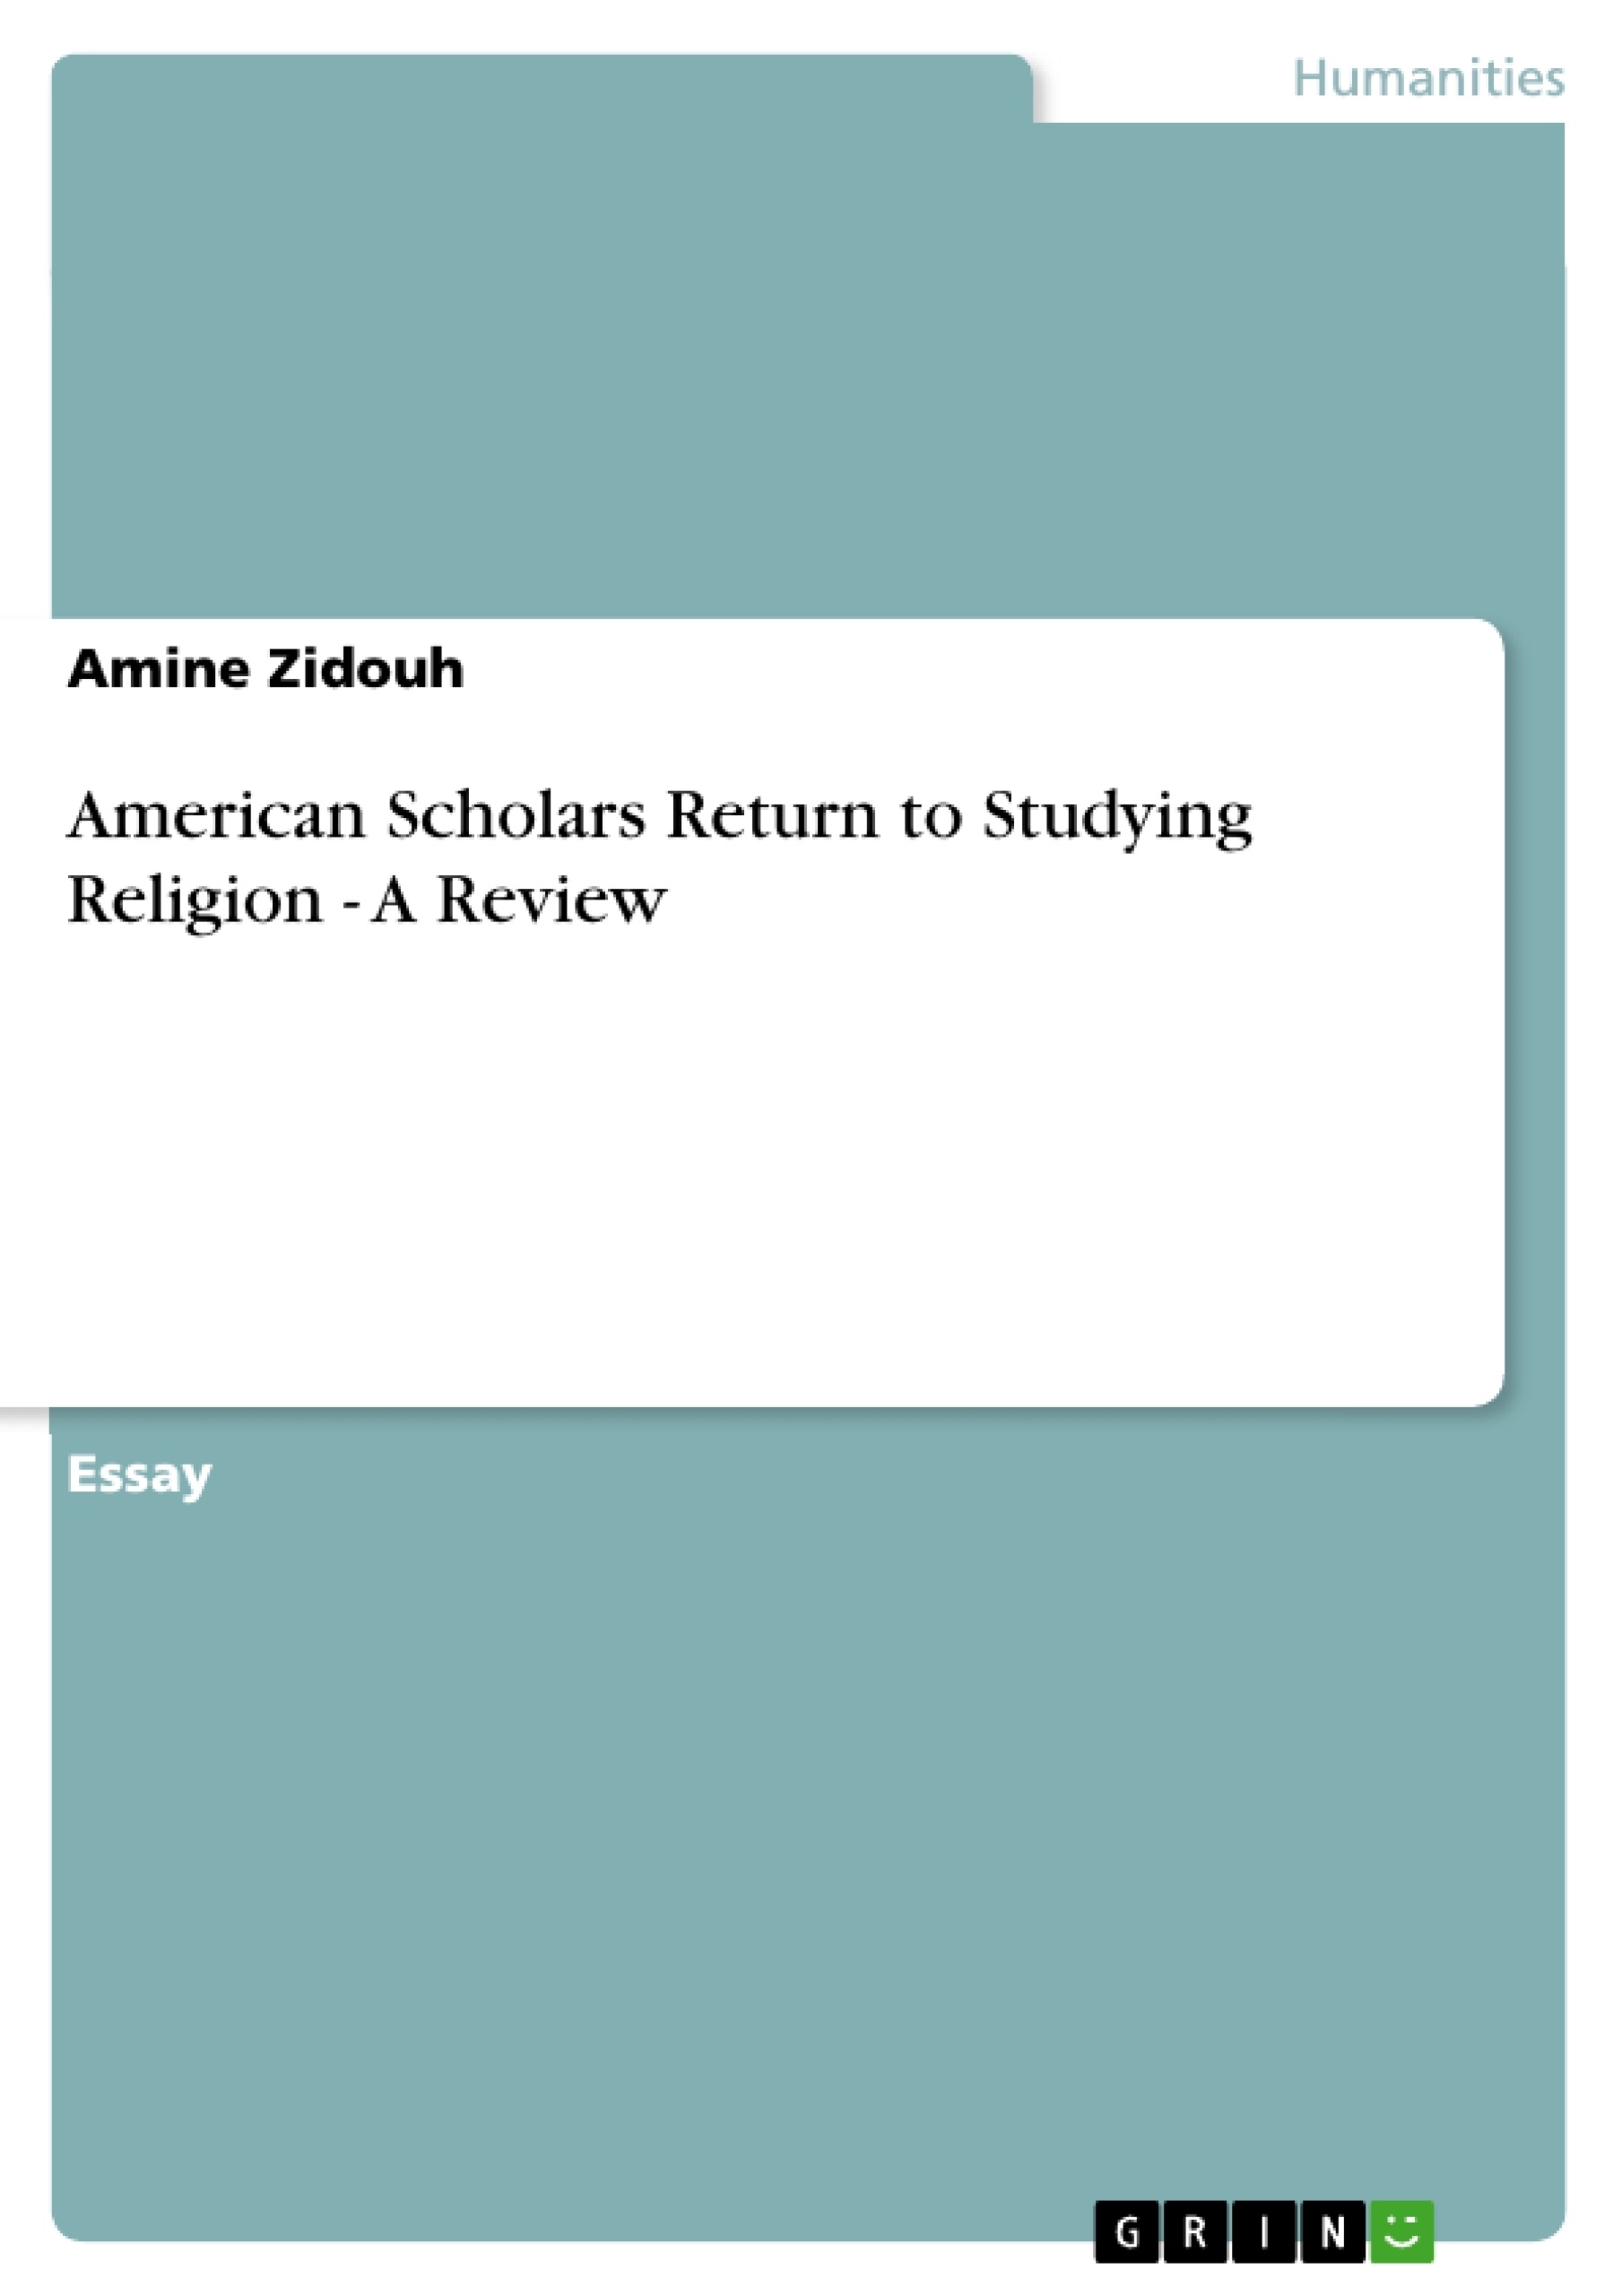 Title: American Scholars Return to Studying Religion - A Review